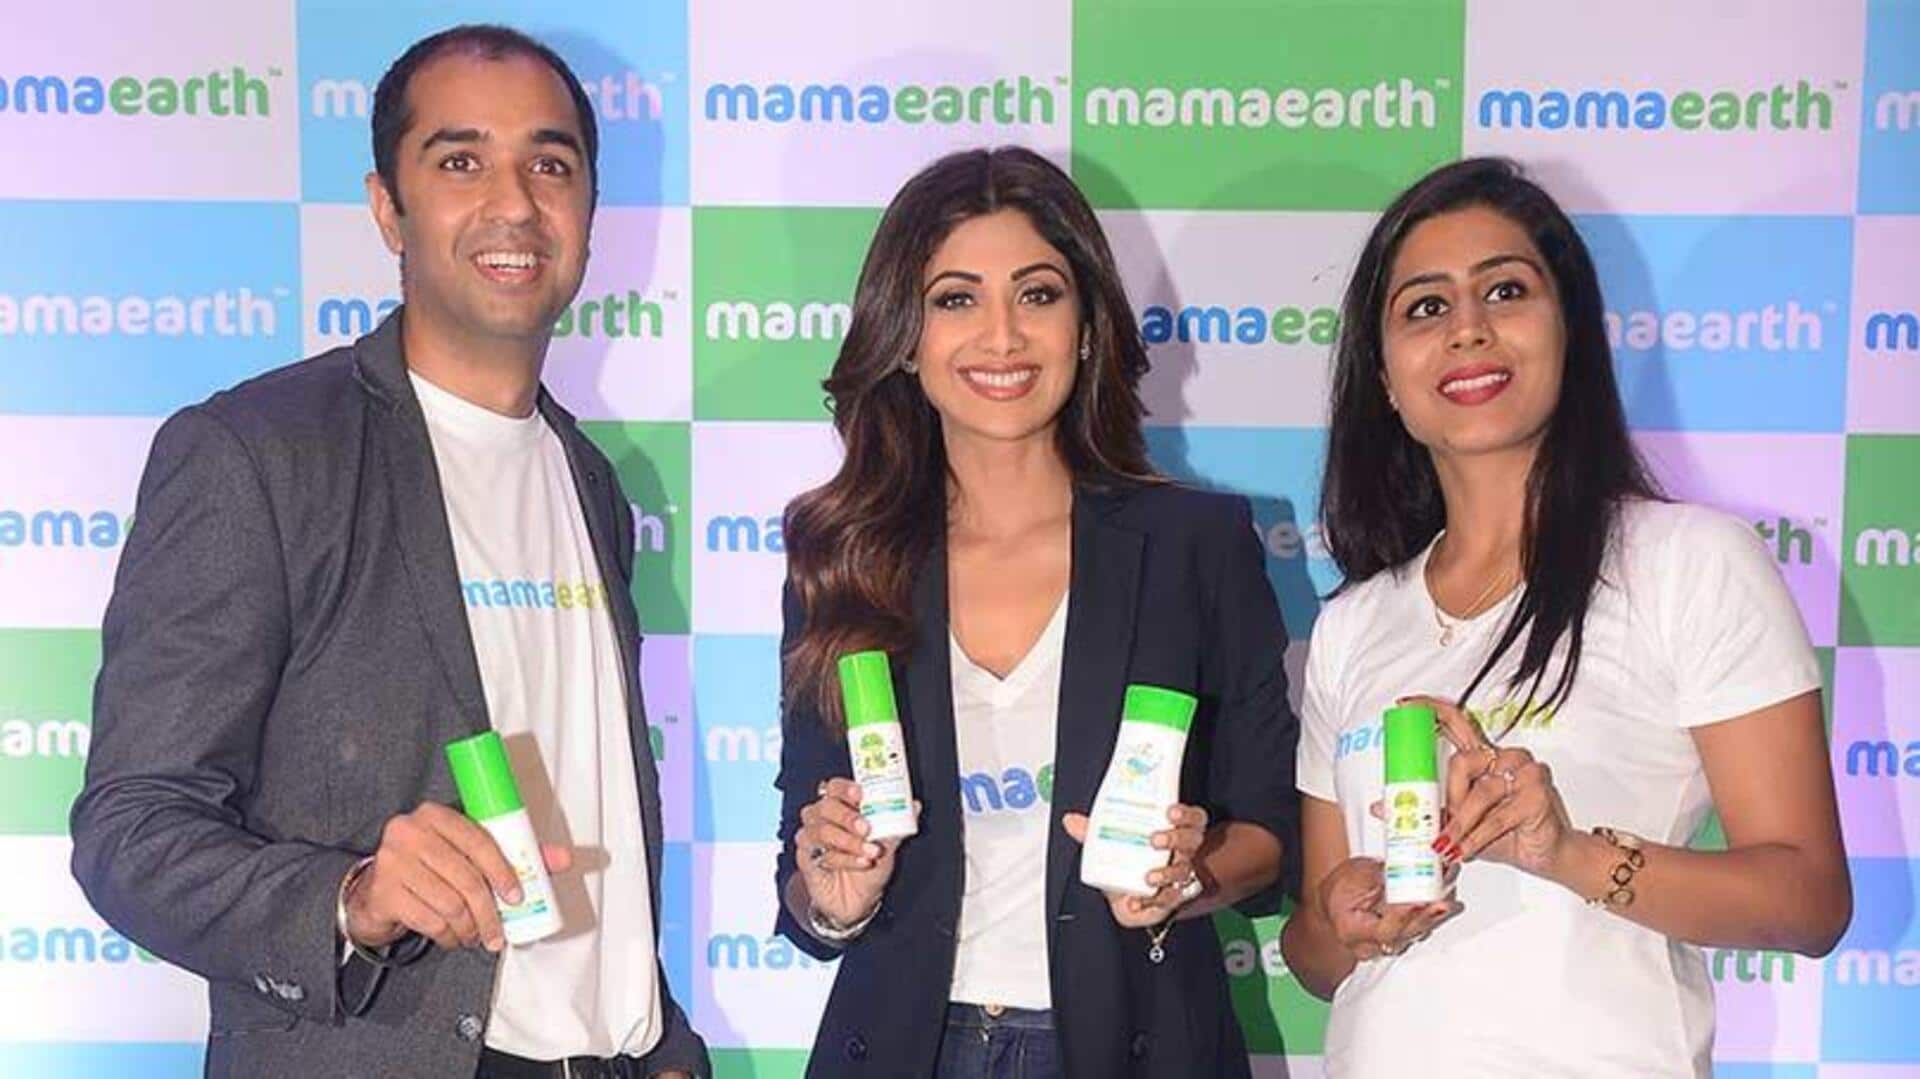 Mamaearth stock sees muted listing, opens at 1.8% premium